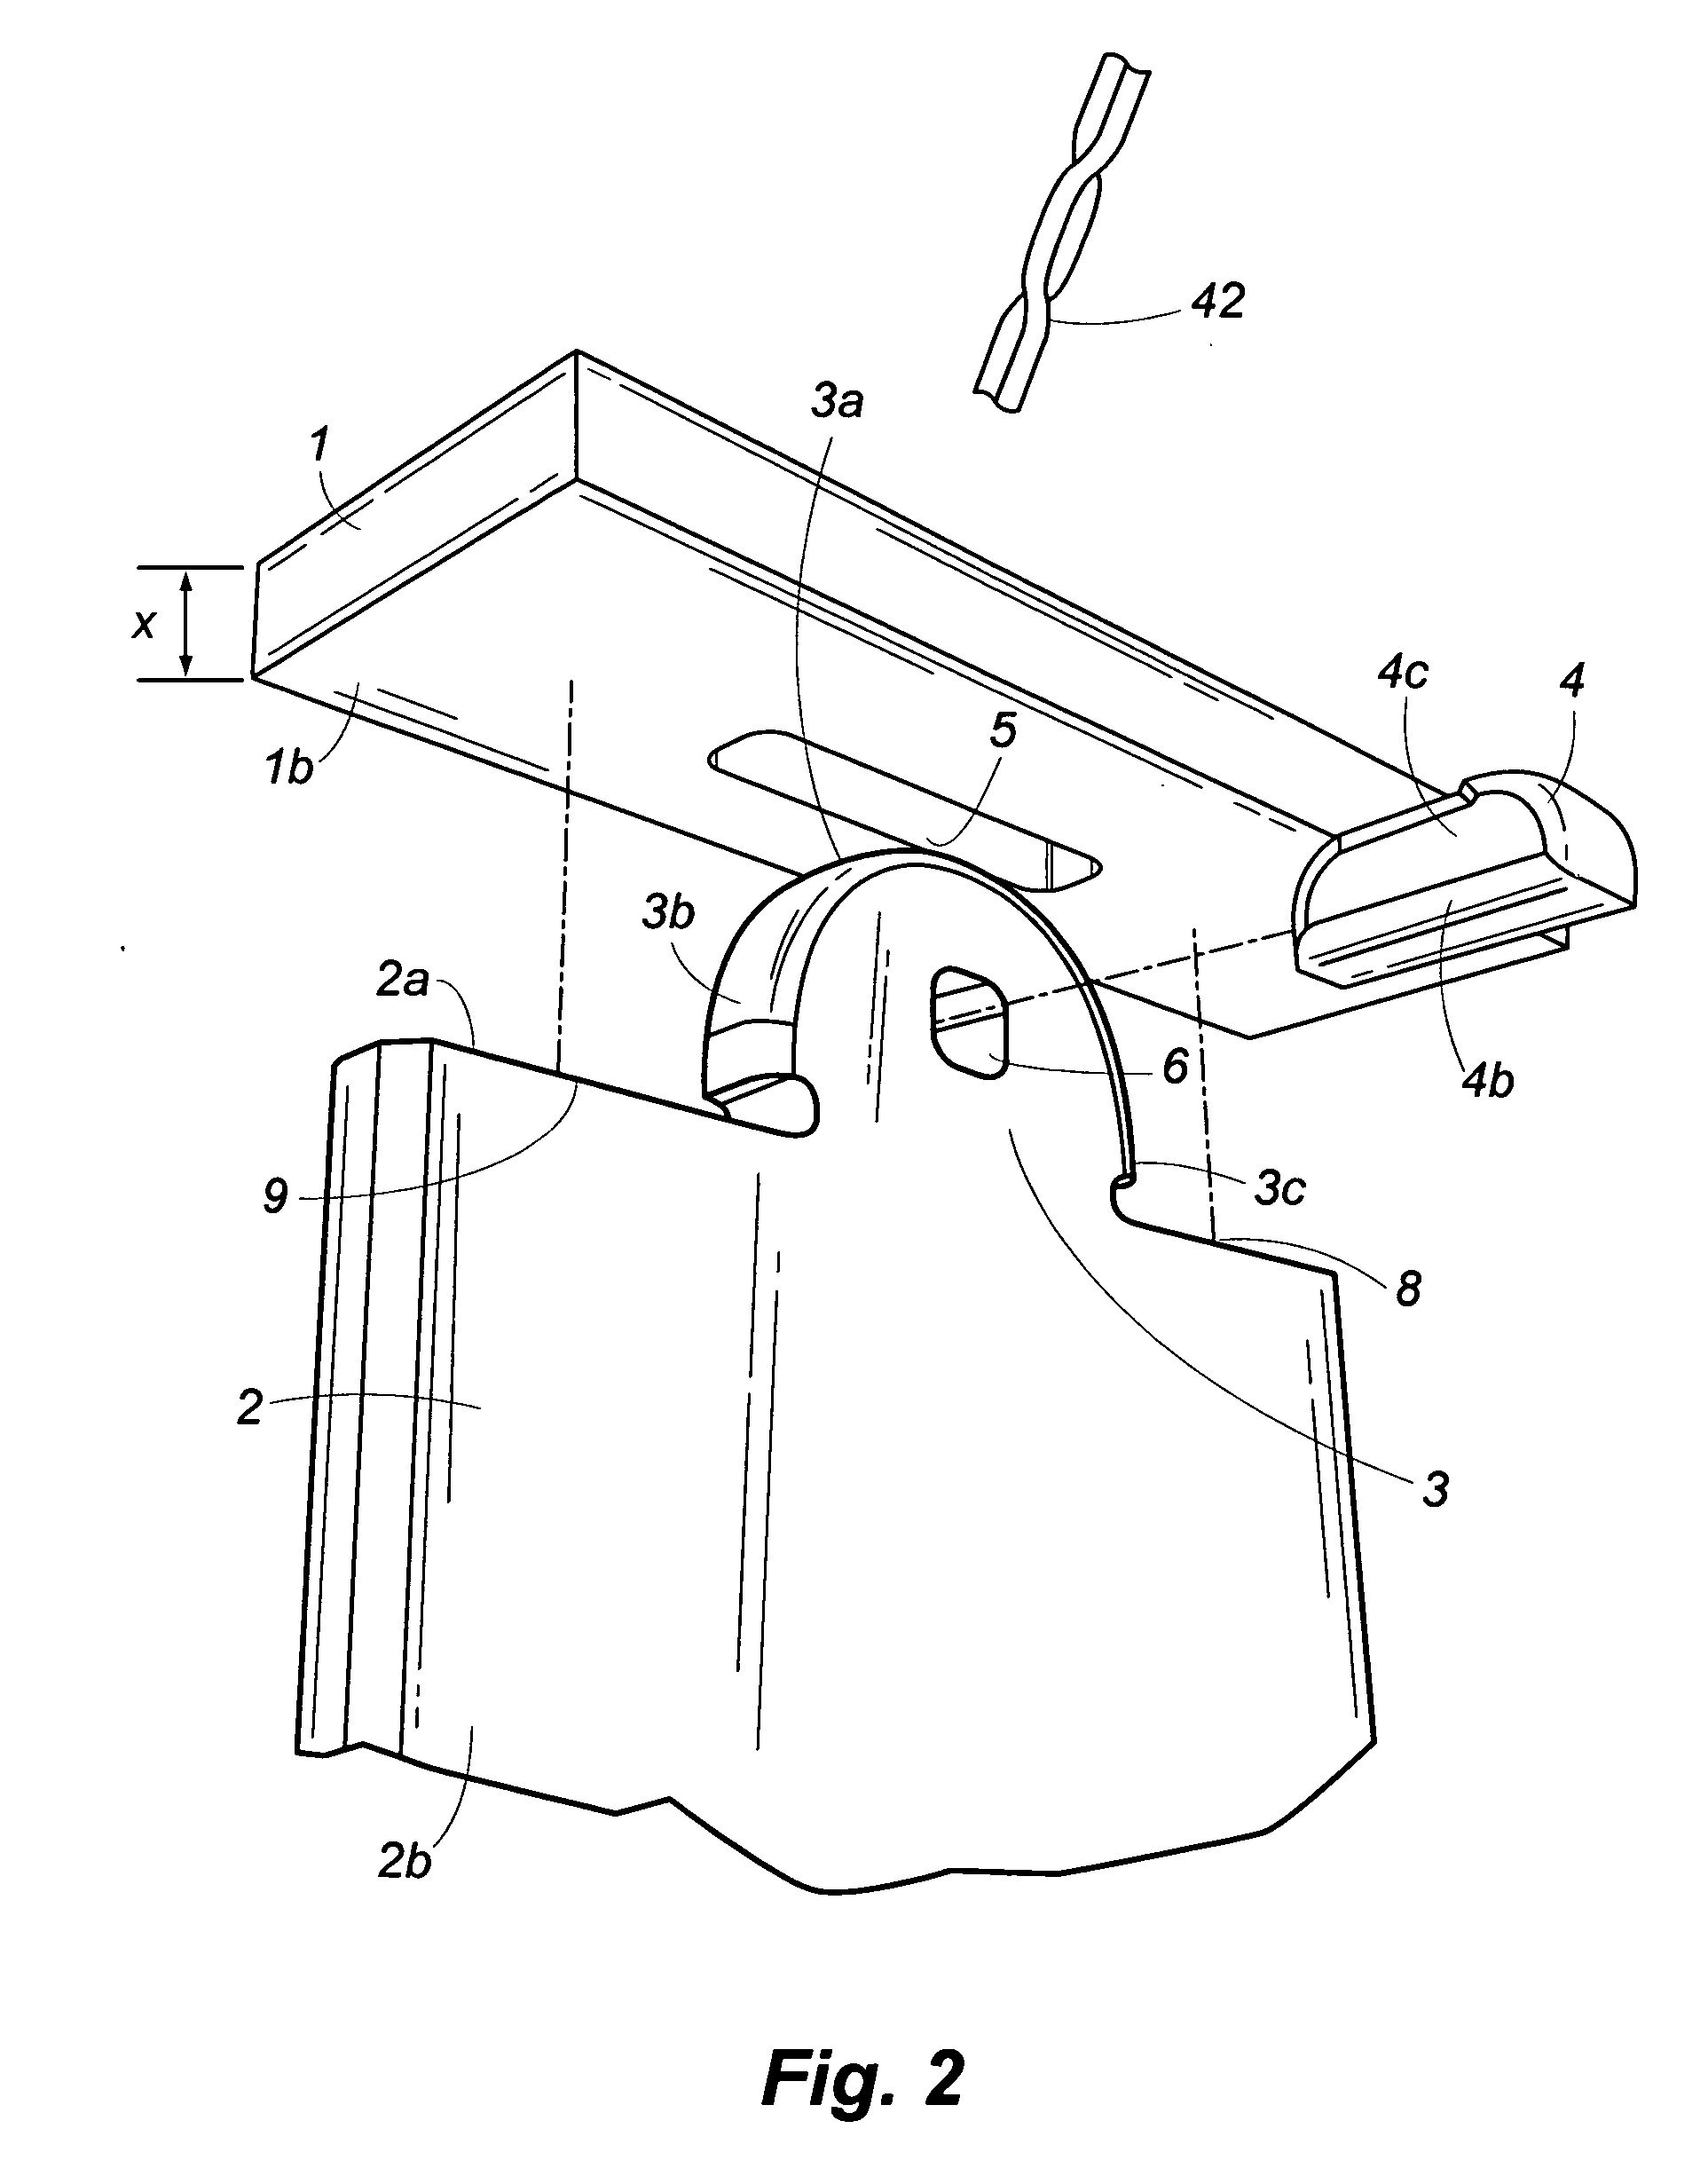 Method for forming a mortise and tenon for tool free joinder, and joint assembled therefrom